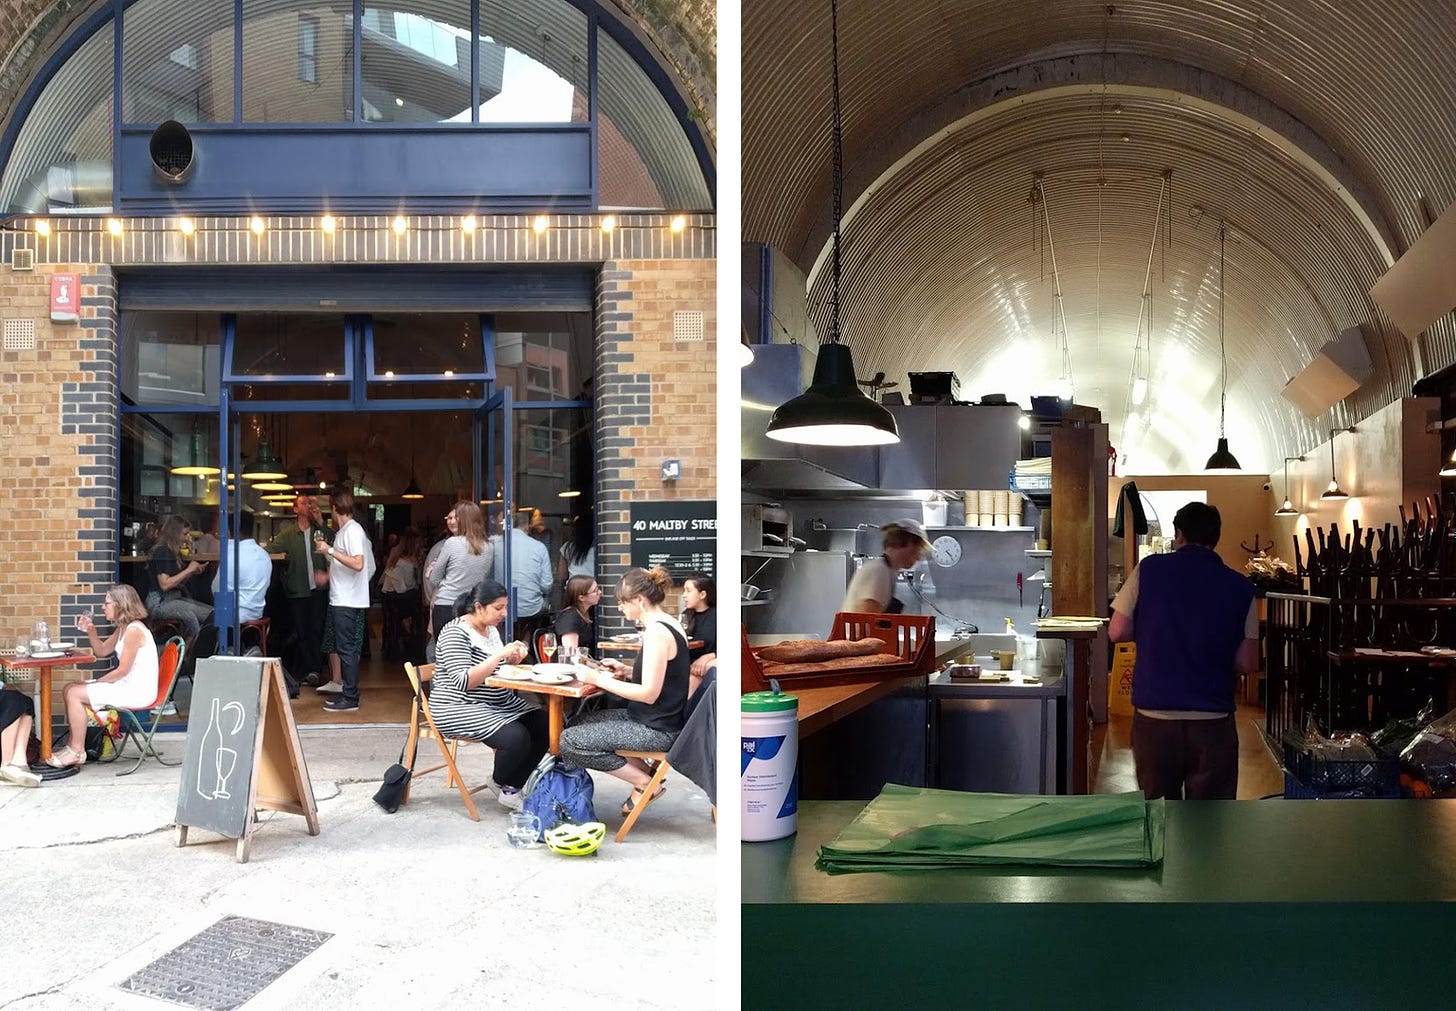 Two photos of 40 Maltby Street. On the left, taken on 11 July 2019. The view is from outside the restaurant. There are three tables with pairs of diners eating outside. In the open glass doors, two women are standing waiting for a seat, while two men are visible standing with glasses of wine in their hands at the bar. Through the open doorway, it’s clear that the restaurant is full. On the right, taken on 19 March 2020. The view is from inside the restaurant. In the foreground, there is a green service counter for fulfilling orders with a stack of green wrapping tissue on it. In the back left, a chef in whites is working at a kitchen station. A person in a blue vest is walking away from the camera toward to the back of the restaurant where chairs are stacked.